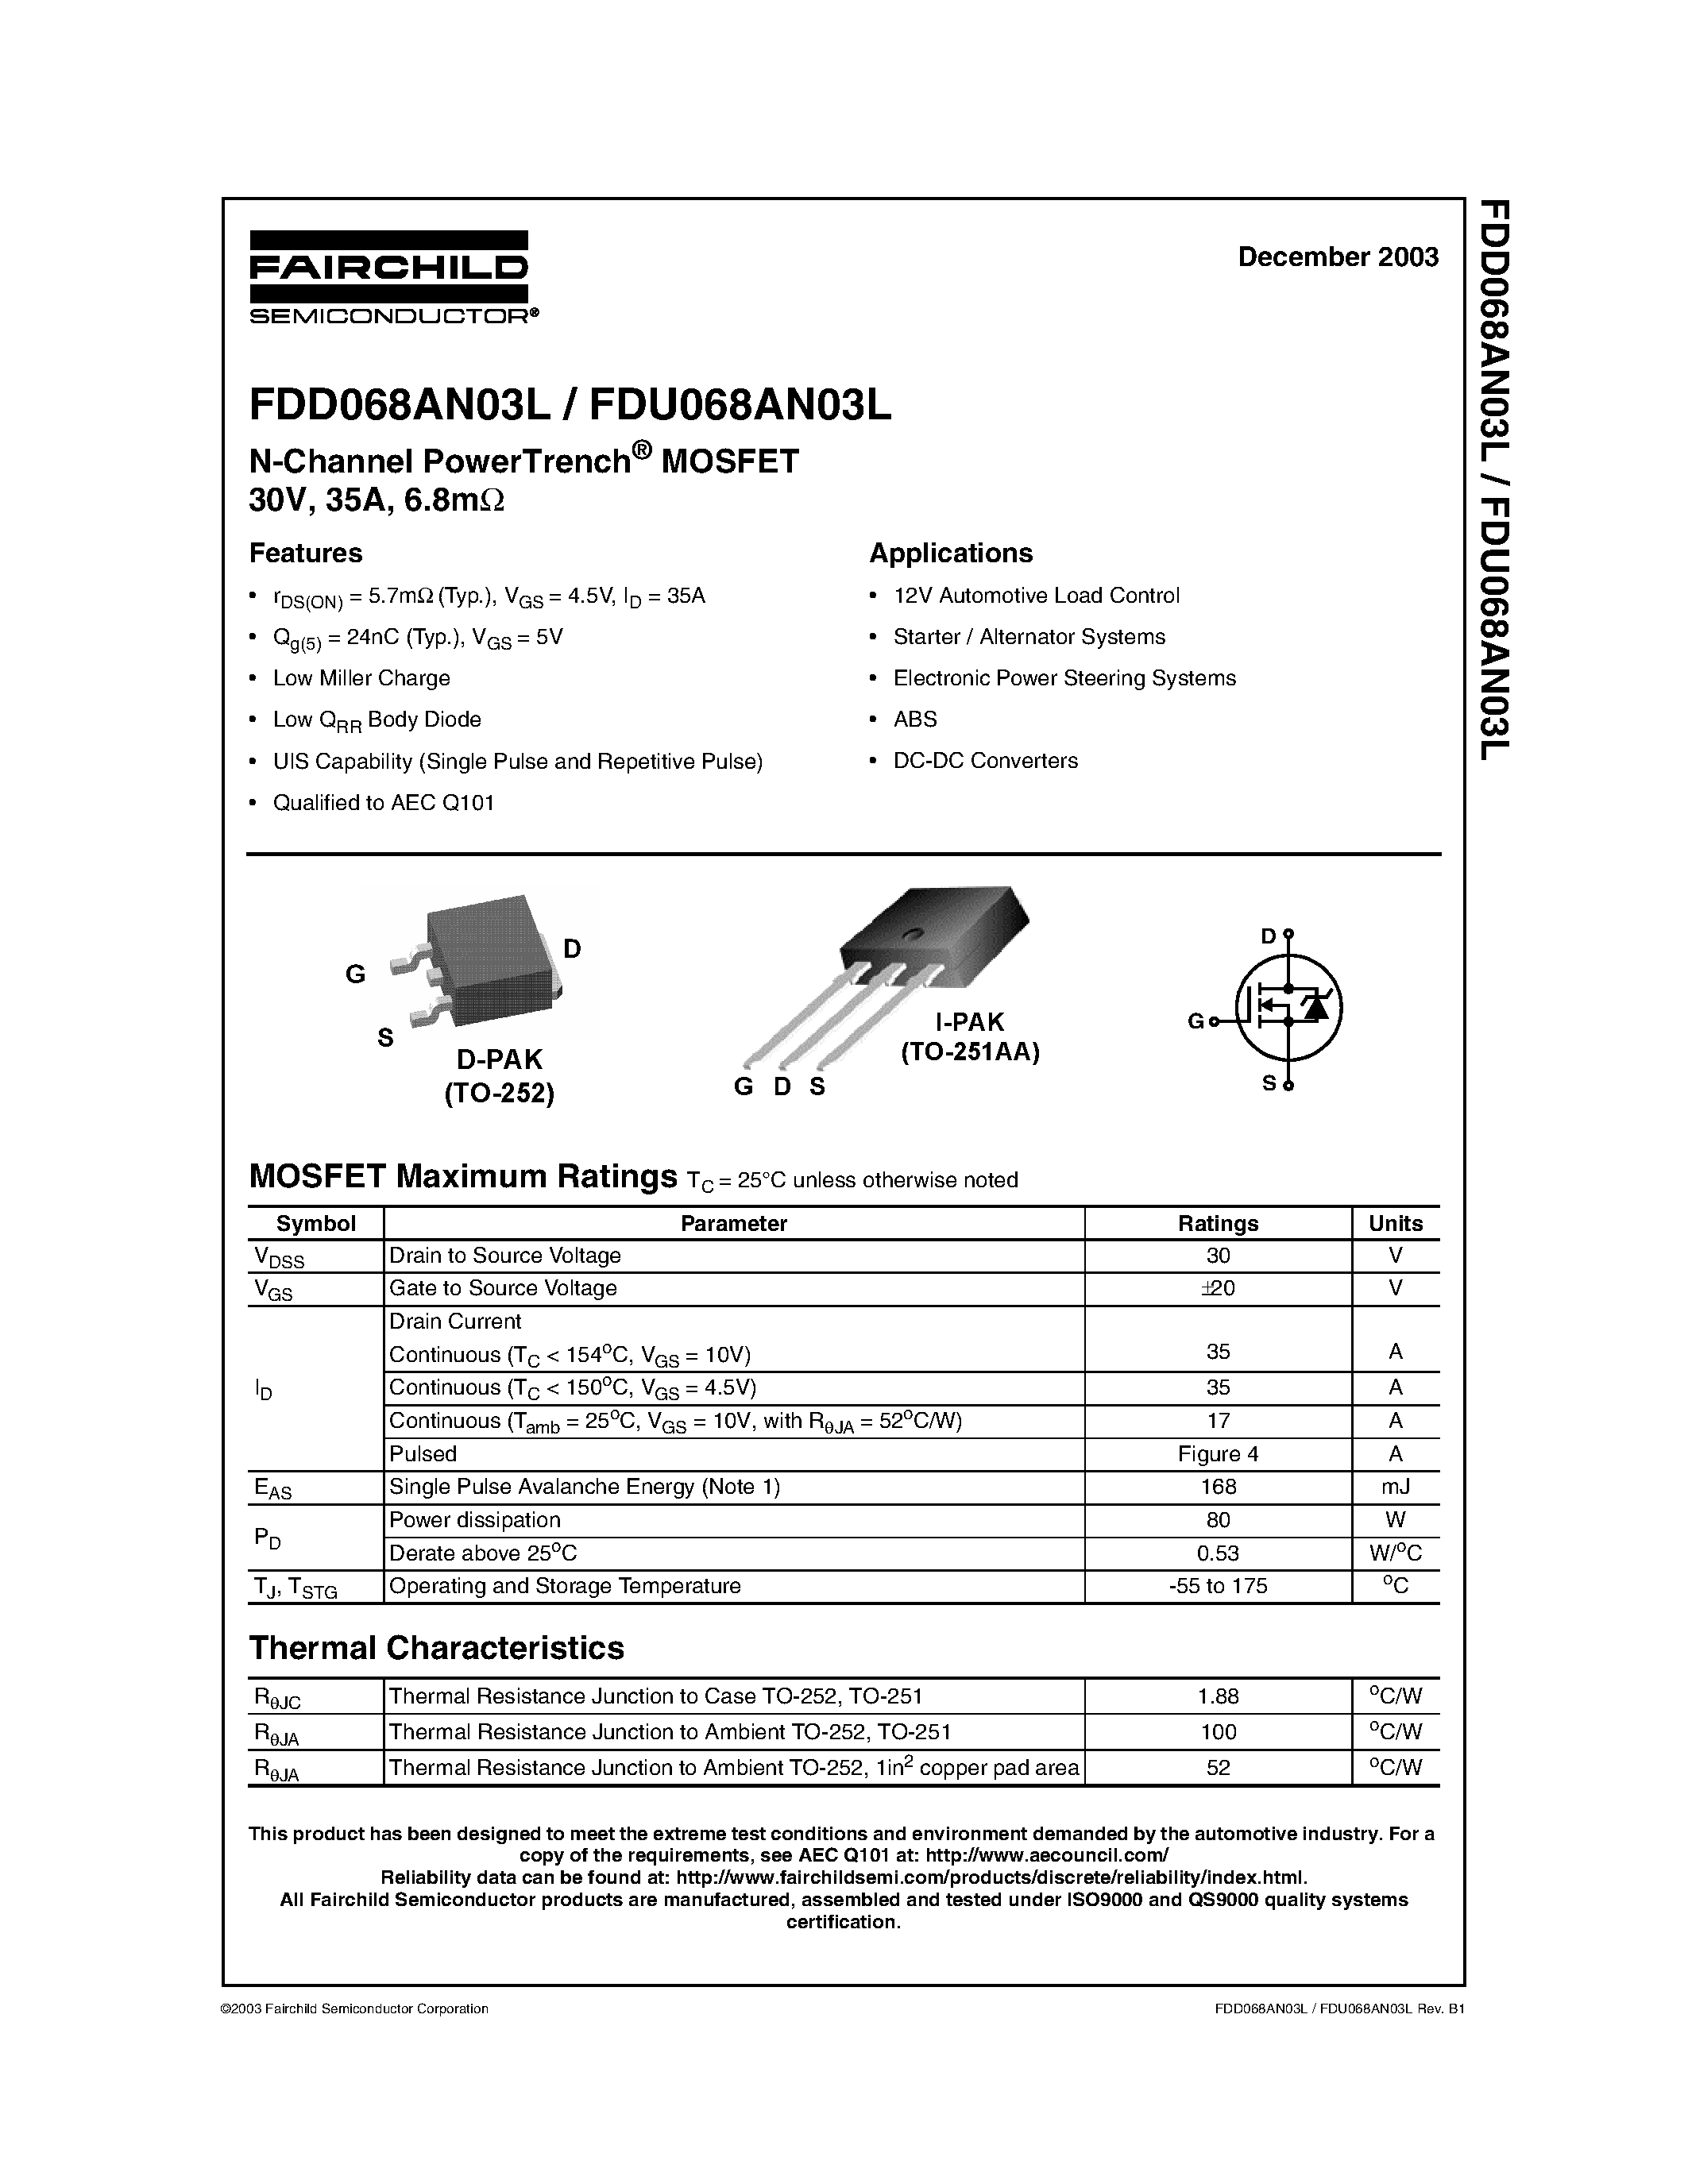 Даташит FDD068AN03 - N-Channel PowerTrench MOSFET 30V/ 35A/ 6.8m страница 1